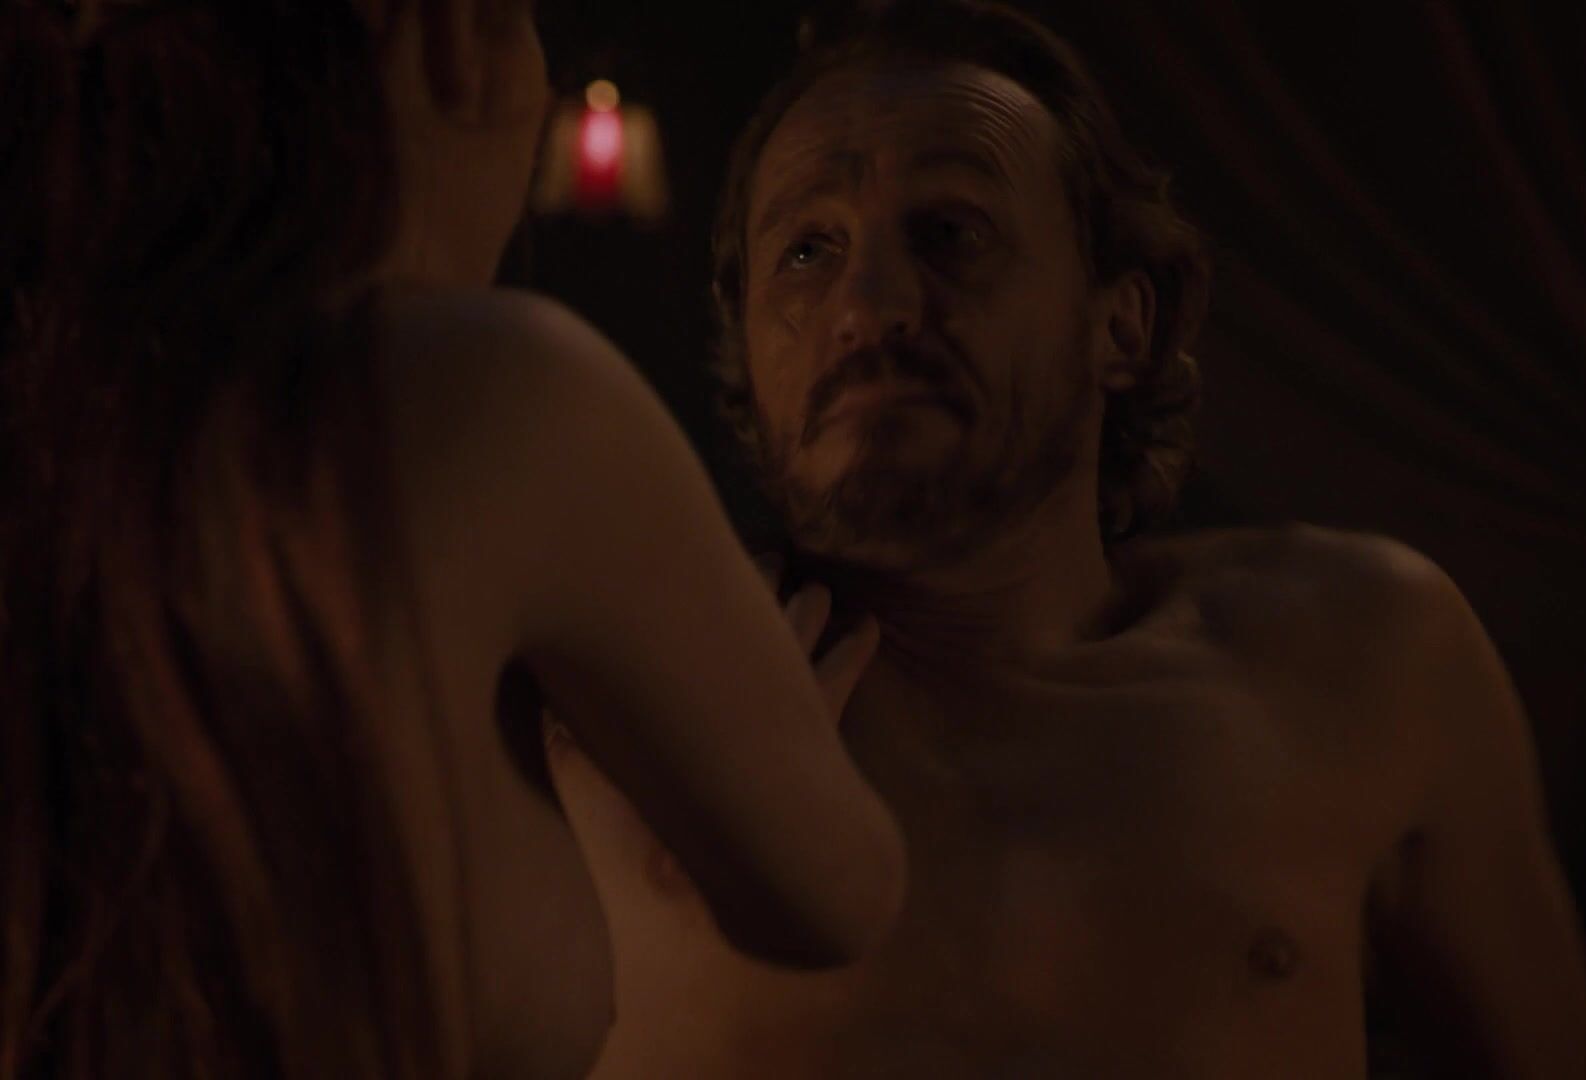 Thylinh Marina Lawrence-Mahrra goes nude in Game of Thrones s08e01 (2019) Gay Longhair